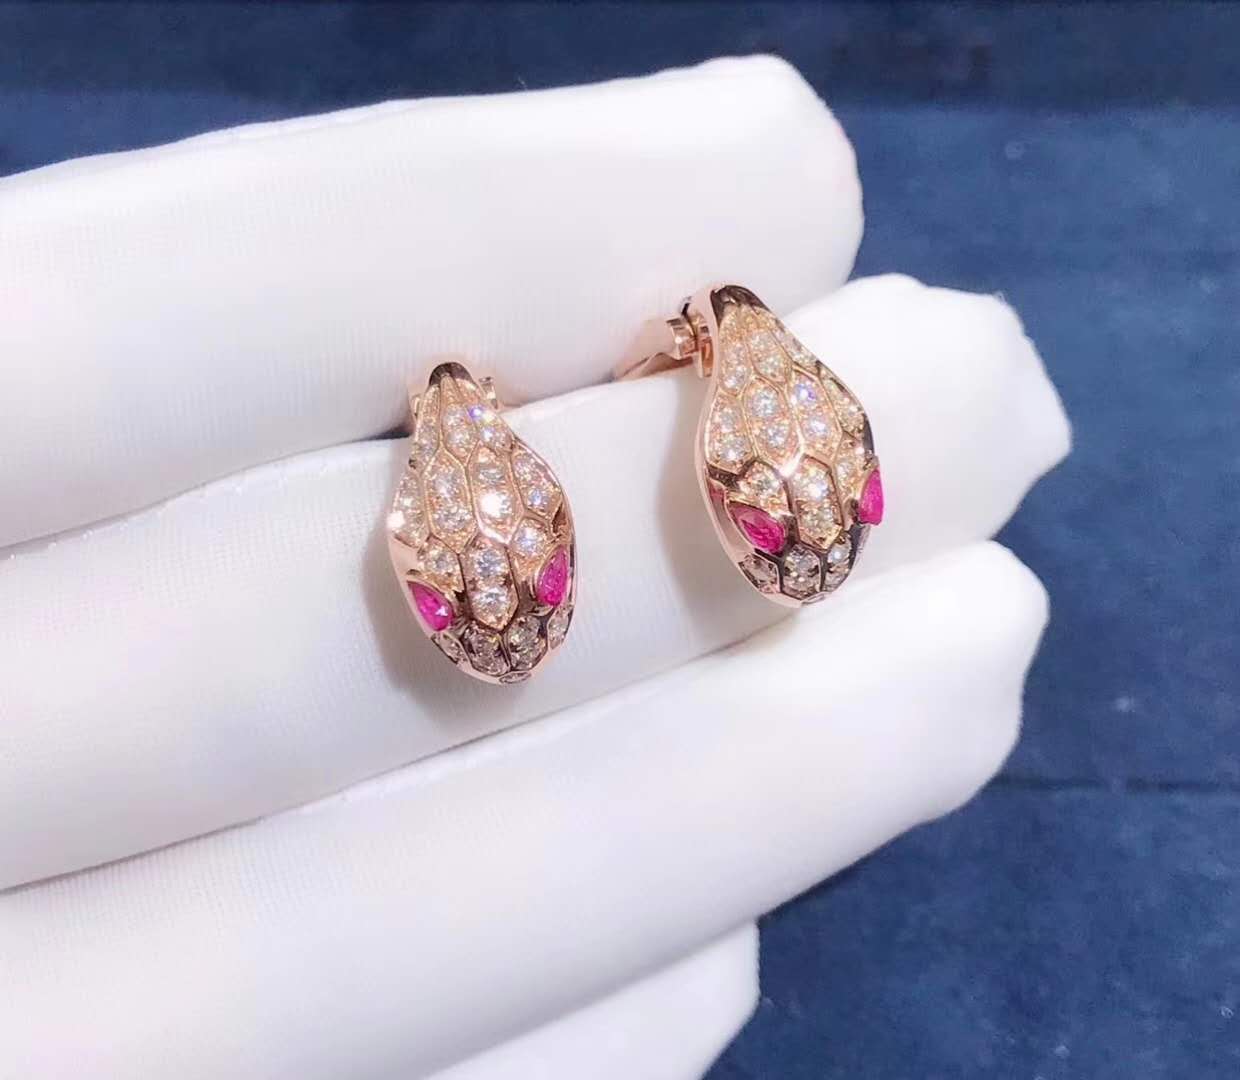 Bvlgari Serpenti Earrings in 18k rose gold set with rubellite eyes and full pave diamonds